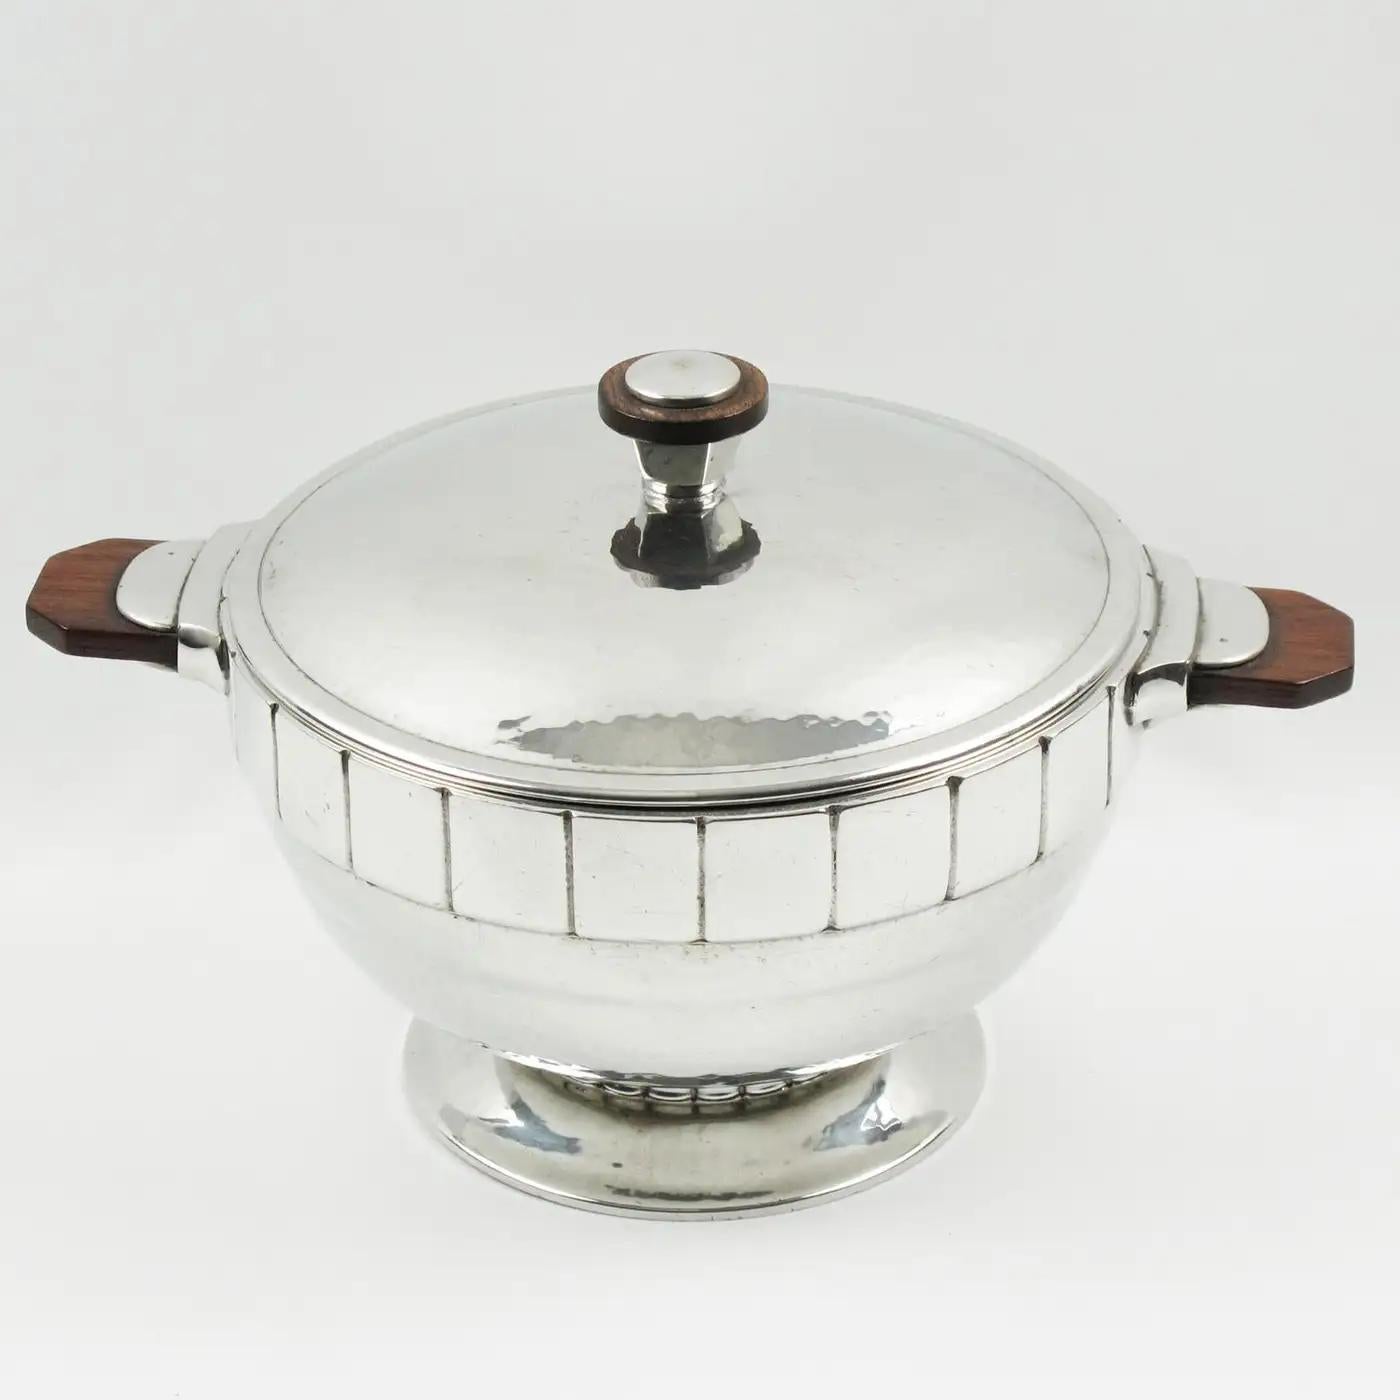 Polished Art Deco Pewter Tureen Covered Dish Centerpiece by H.J. Swiss, 1940s For Sale